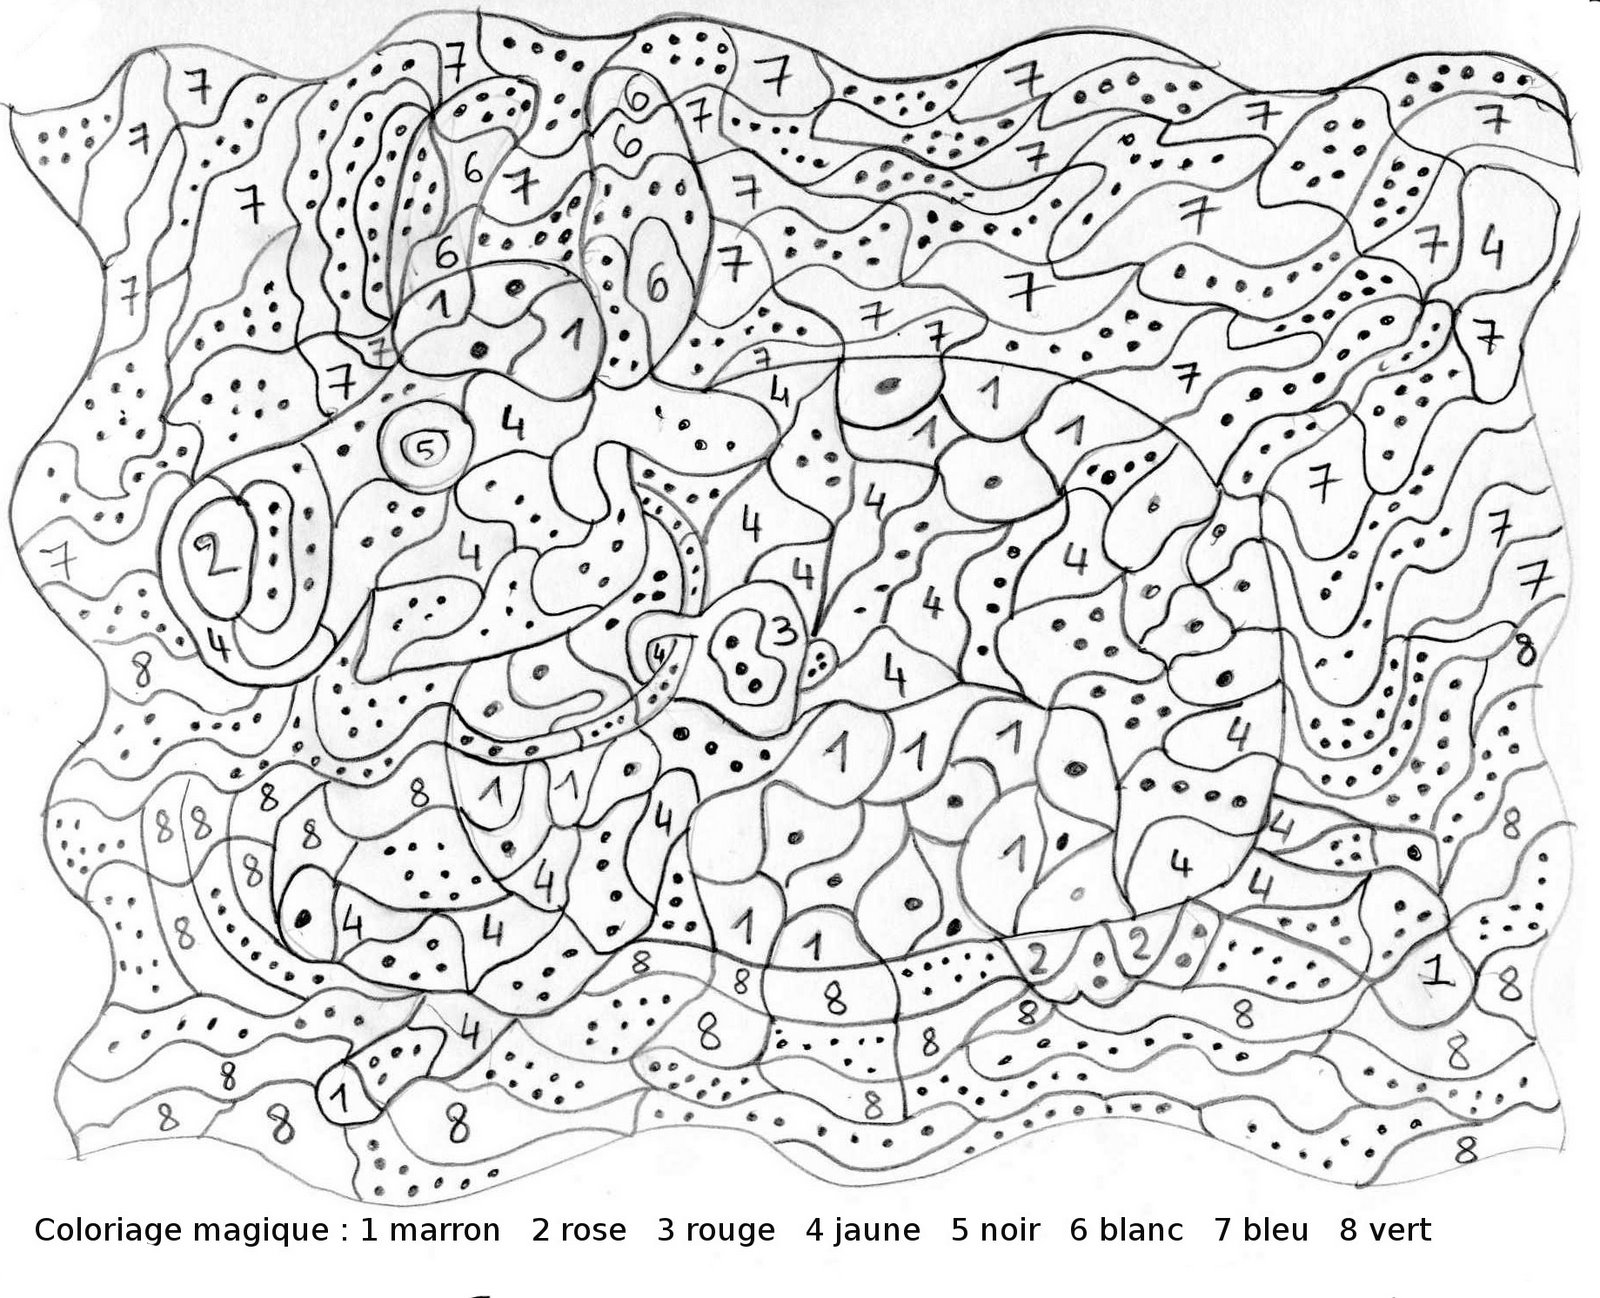 Coloring page: Coloring by numbers (Educational) #125578 - Free Printable Coloring Pages